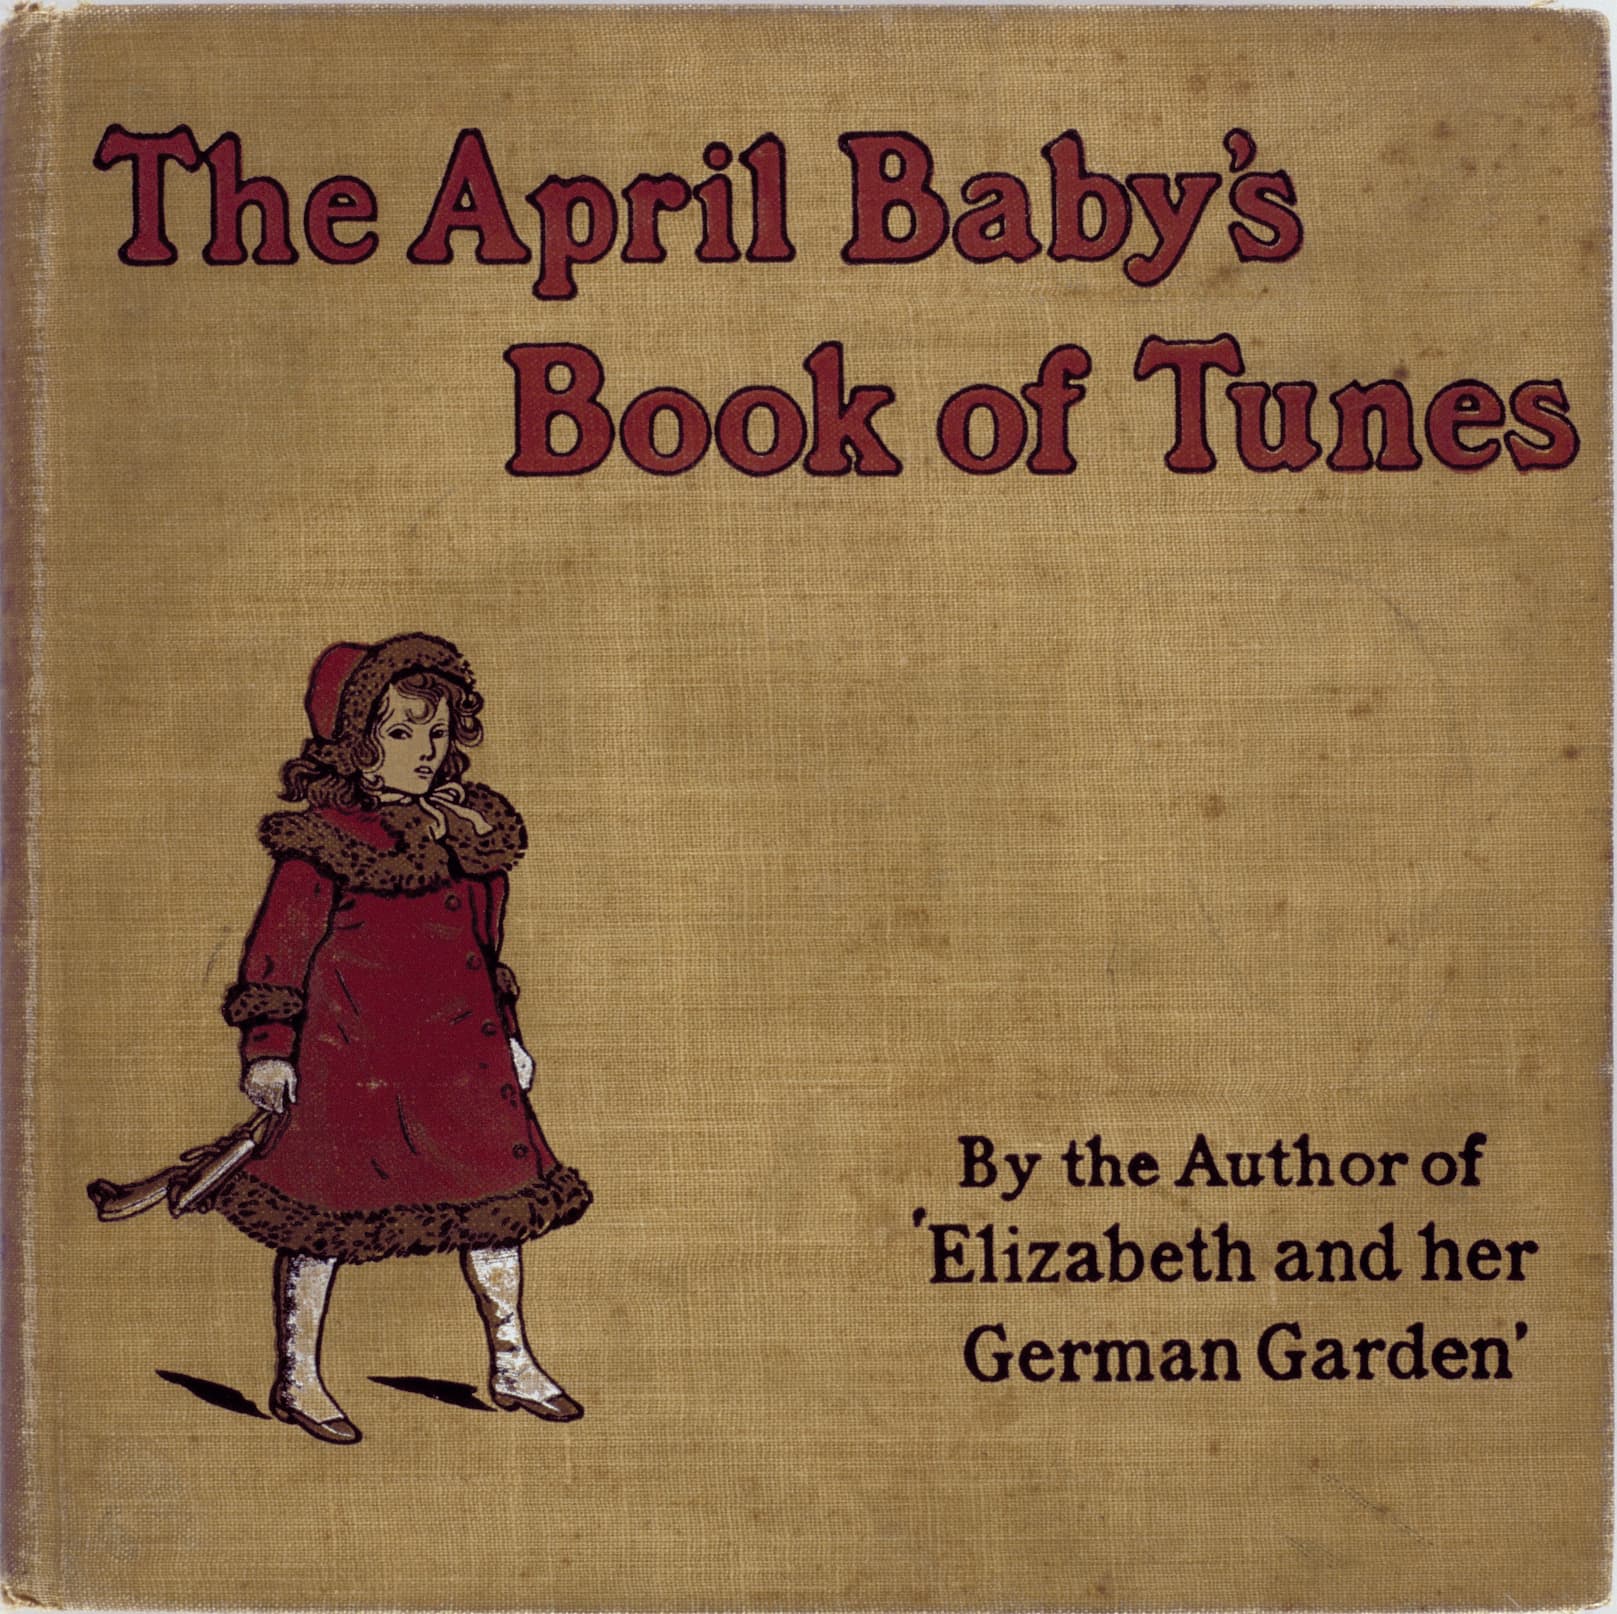 Cover of “The April Baby’s Book of Tunes”